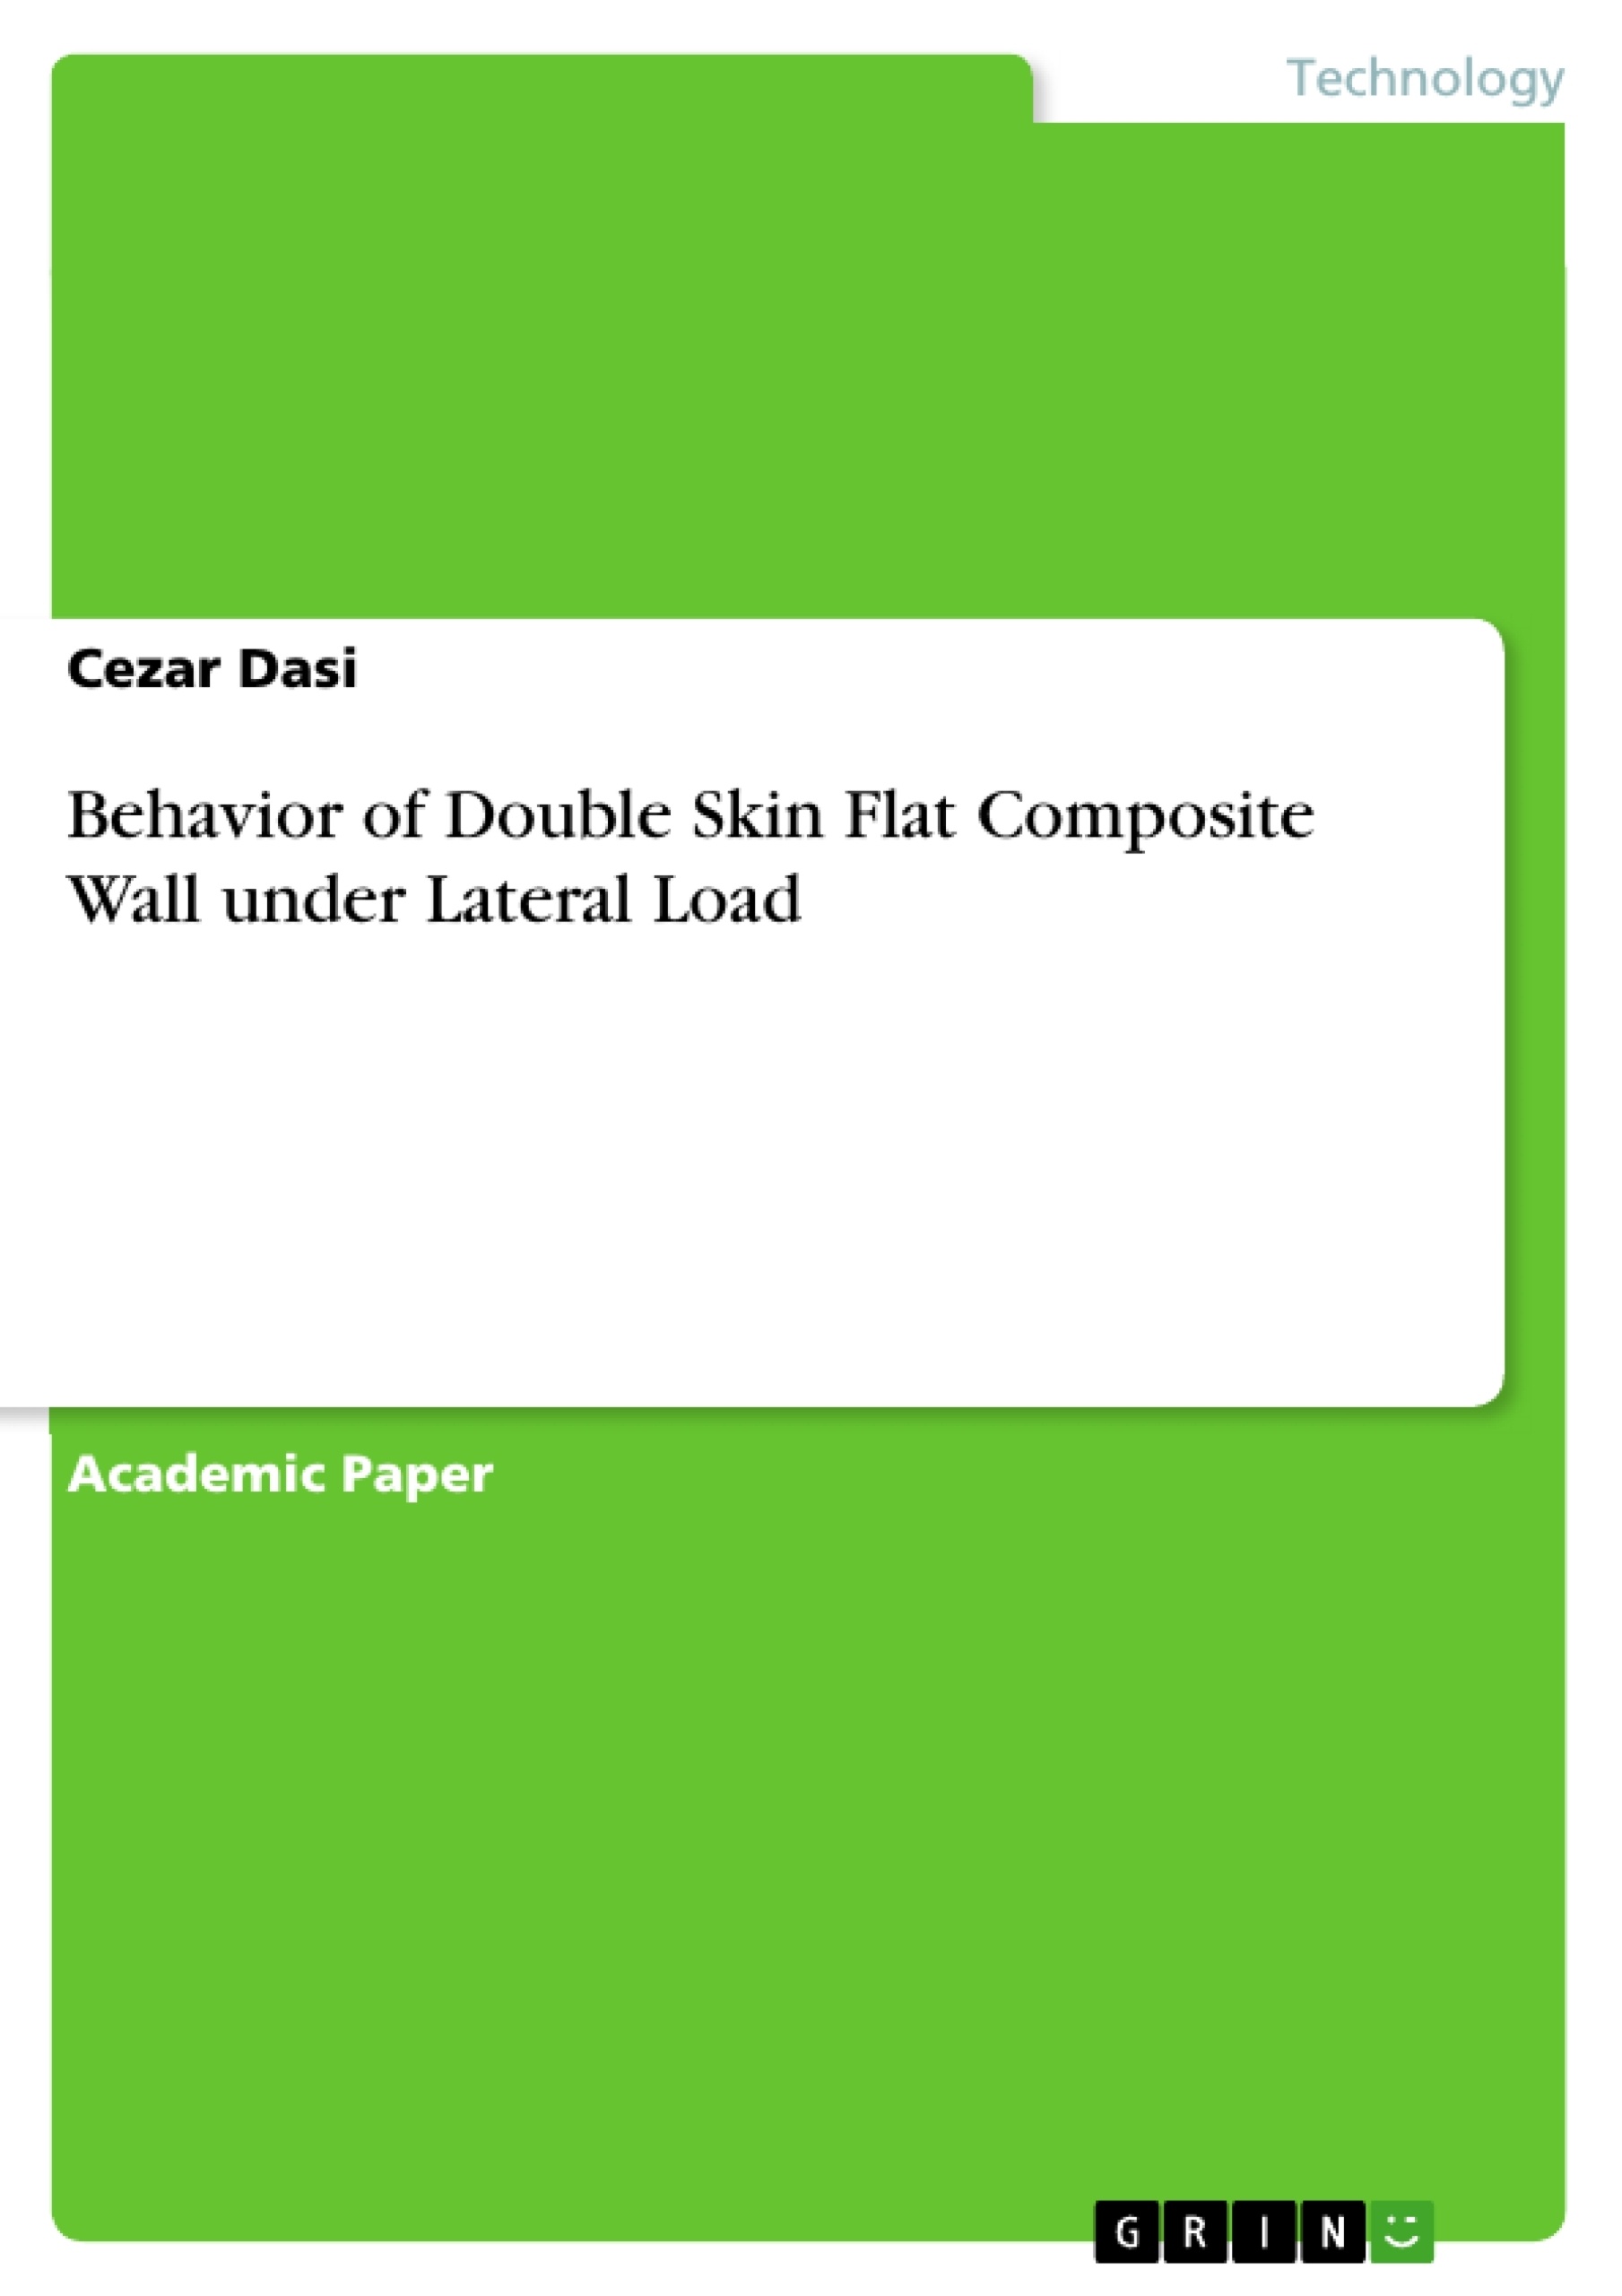 Title: Behavior of Double Skin Flat Composite Wall under Lateral Load